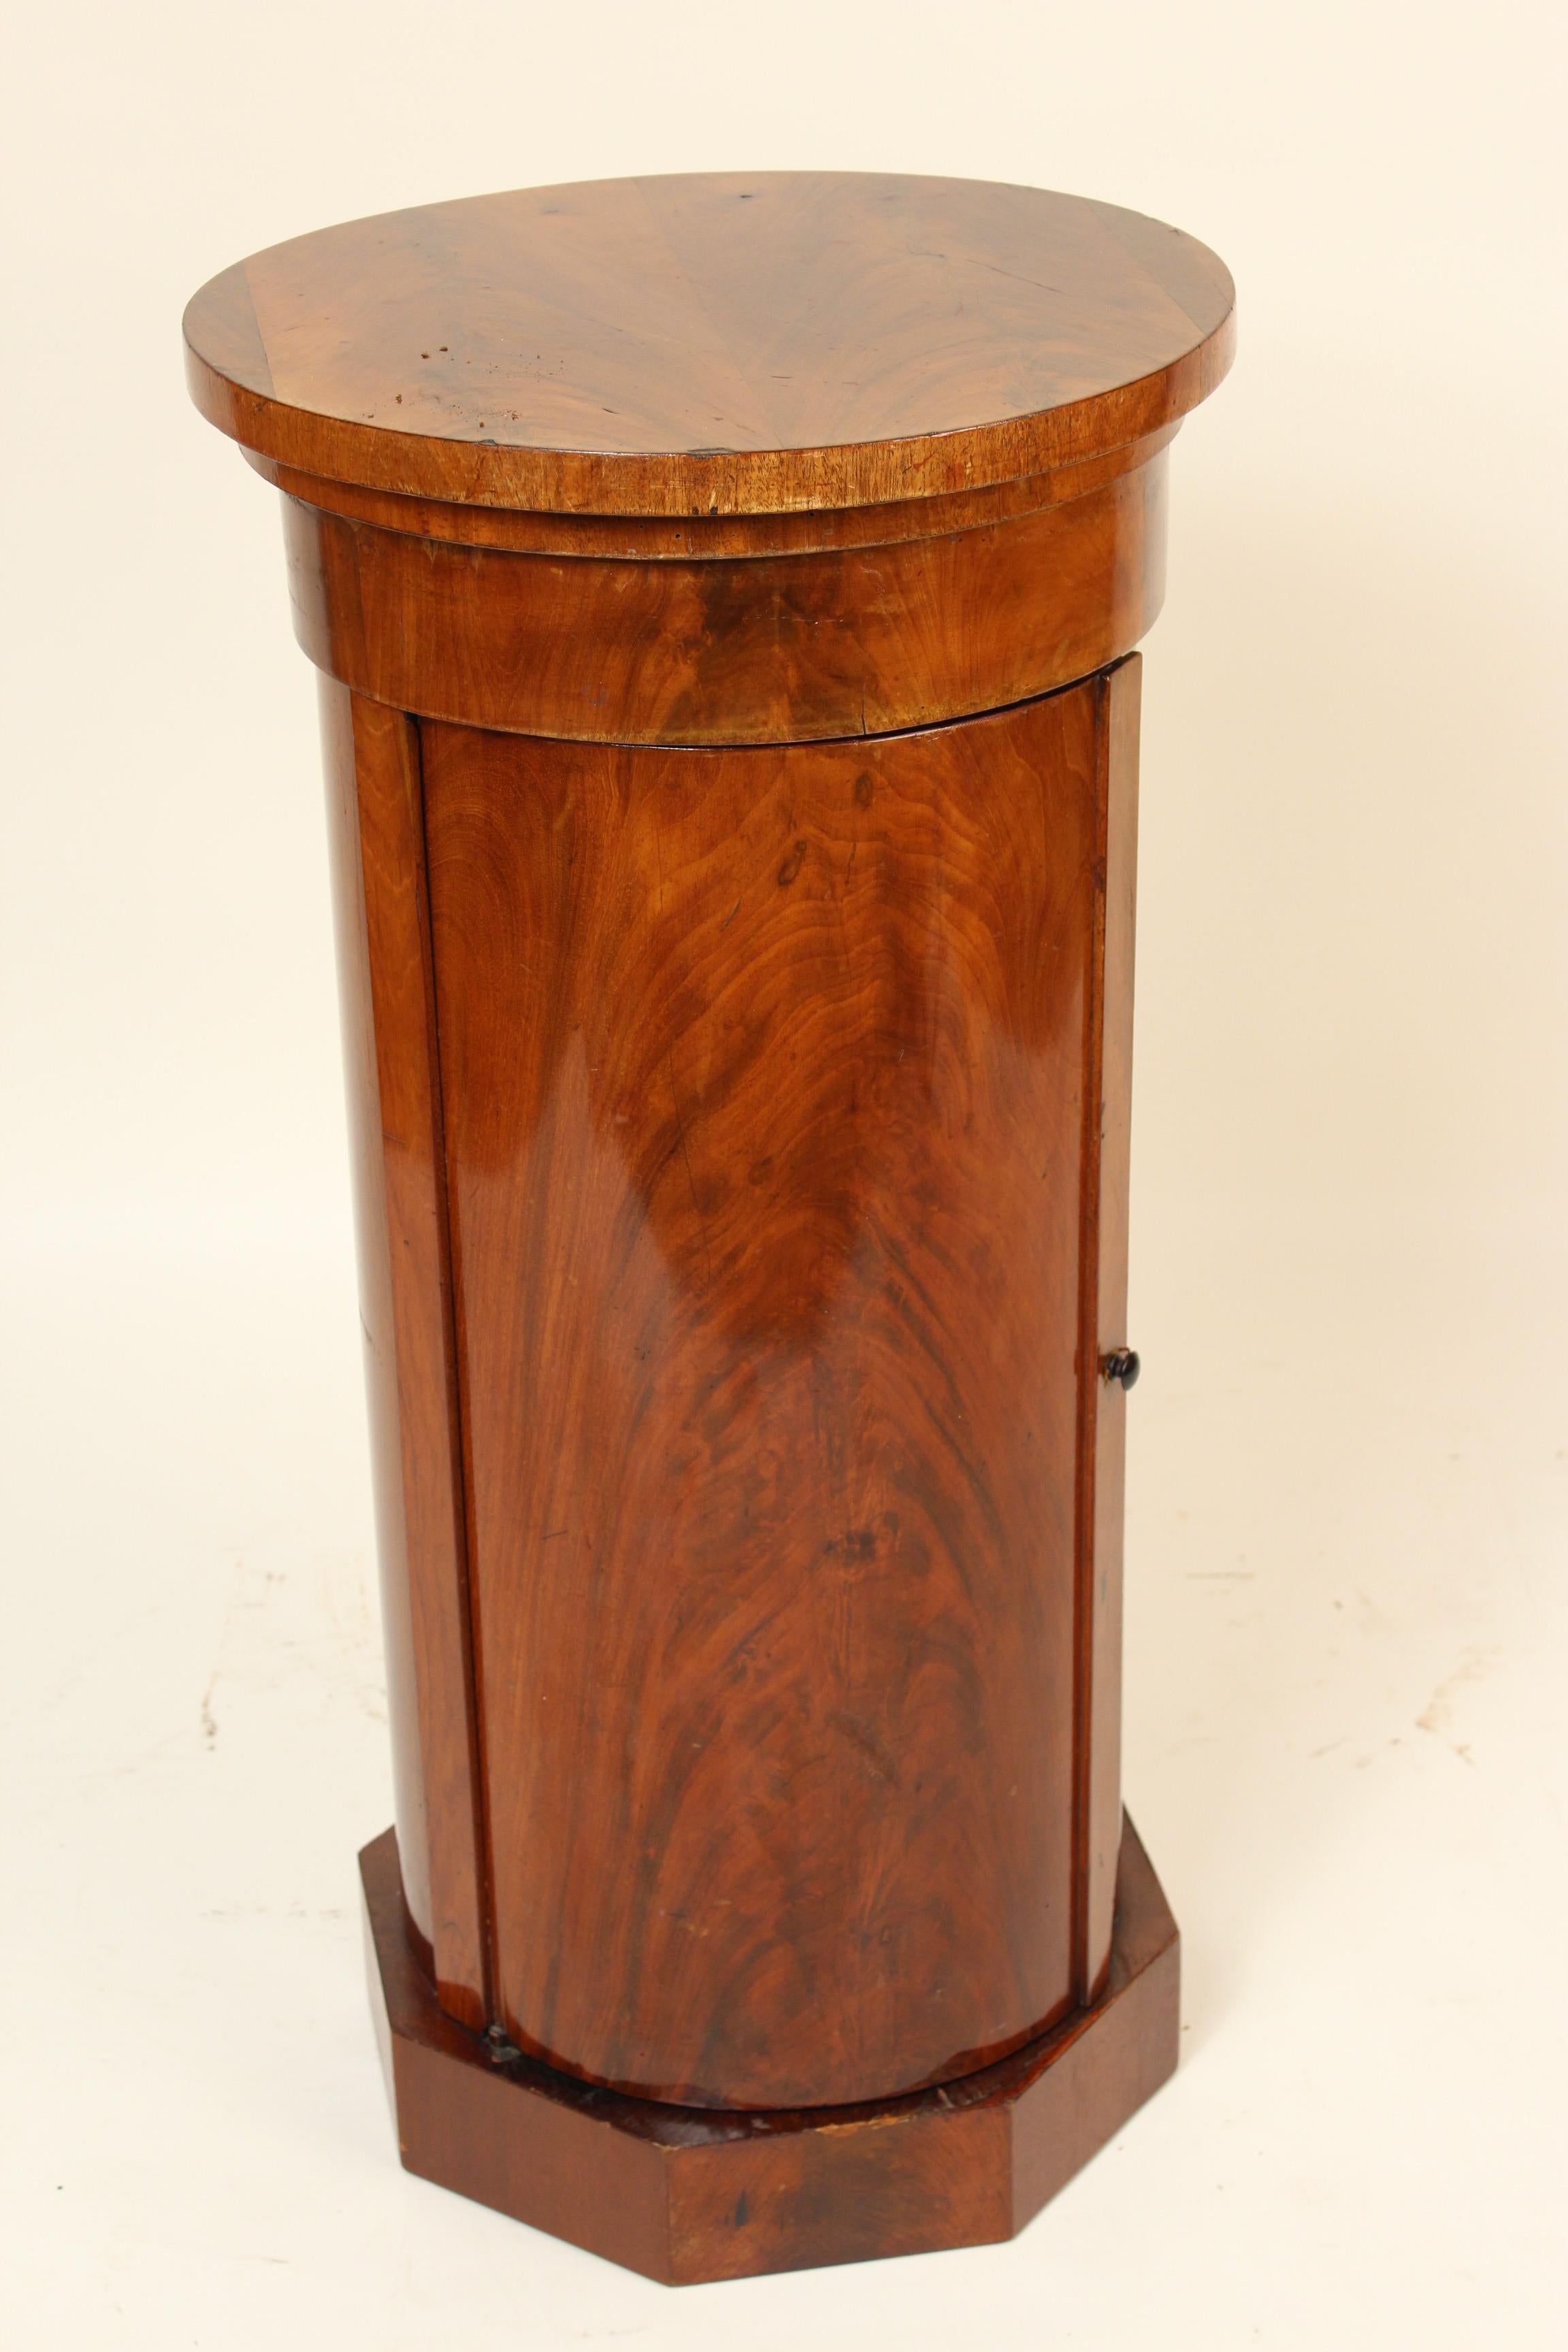 Continental neoclassical style flame mahogany cylinder form pedestal table, 19th century. The top opens and there is a door that opens.